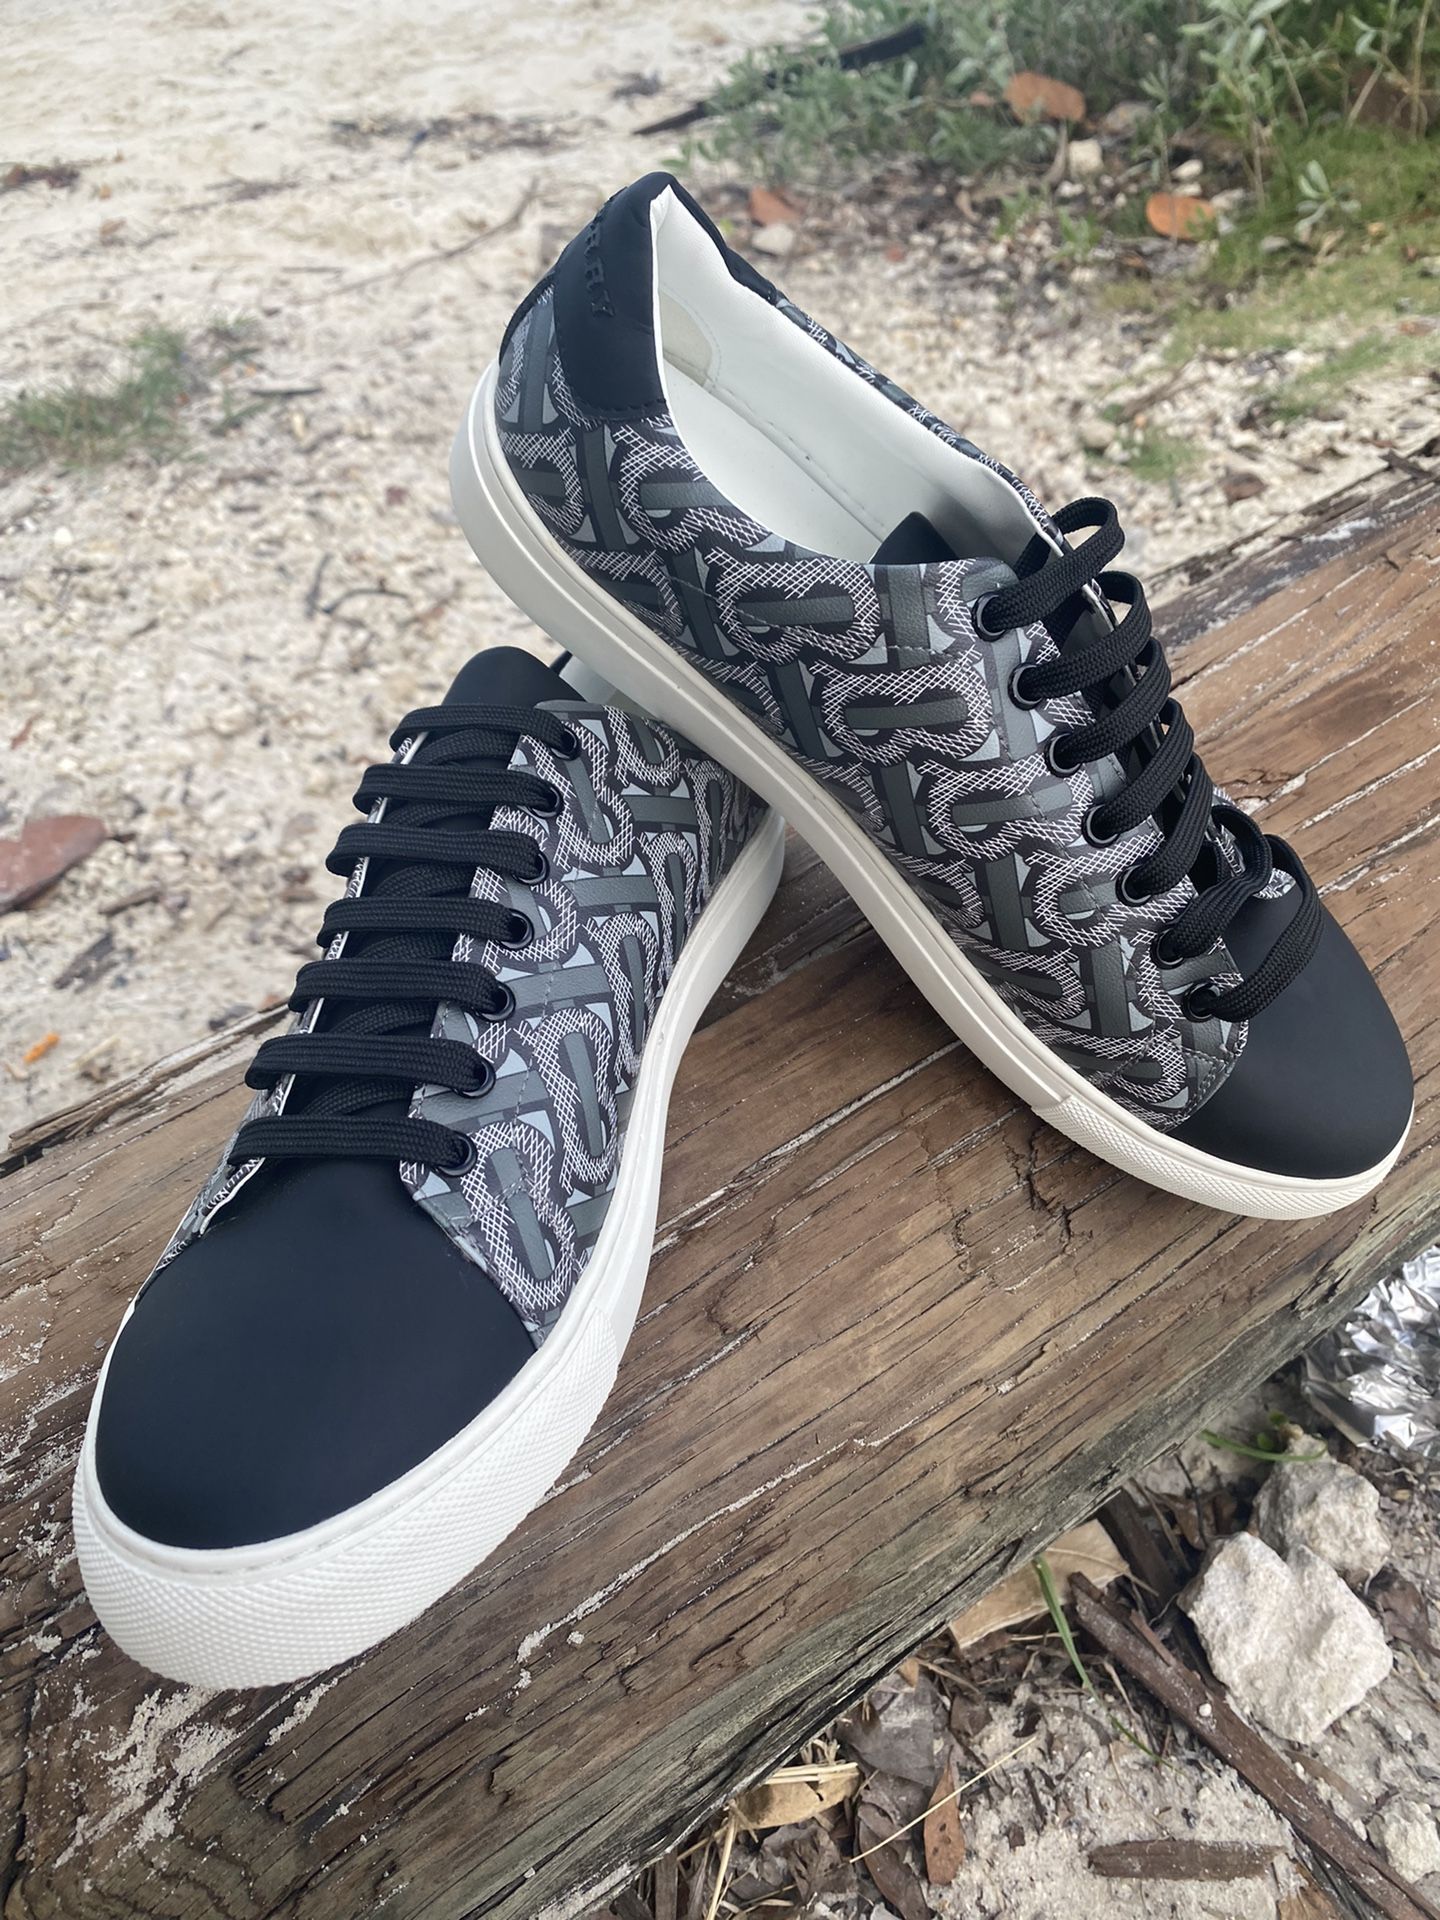 Burberry Sneakers - Size 12